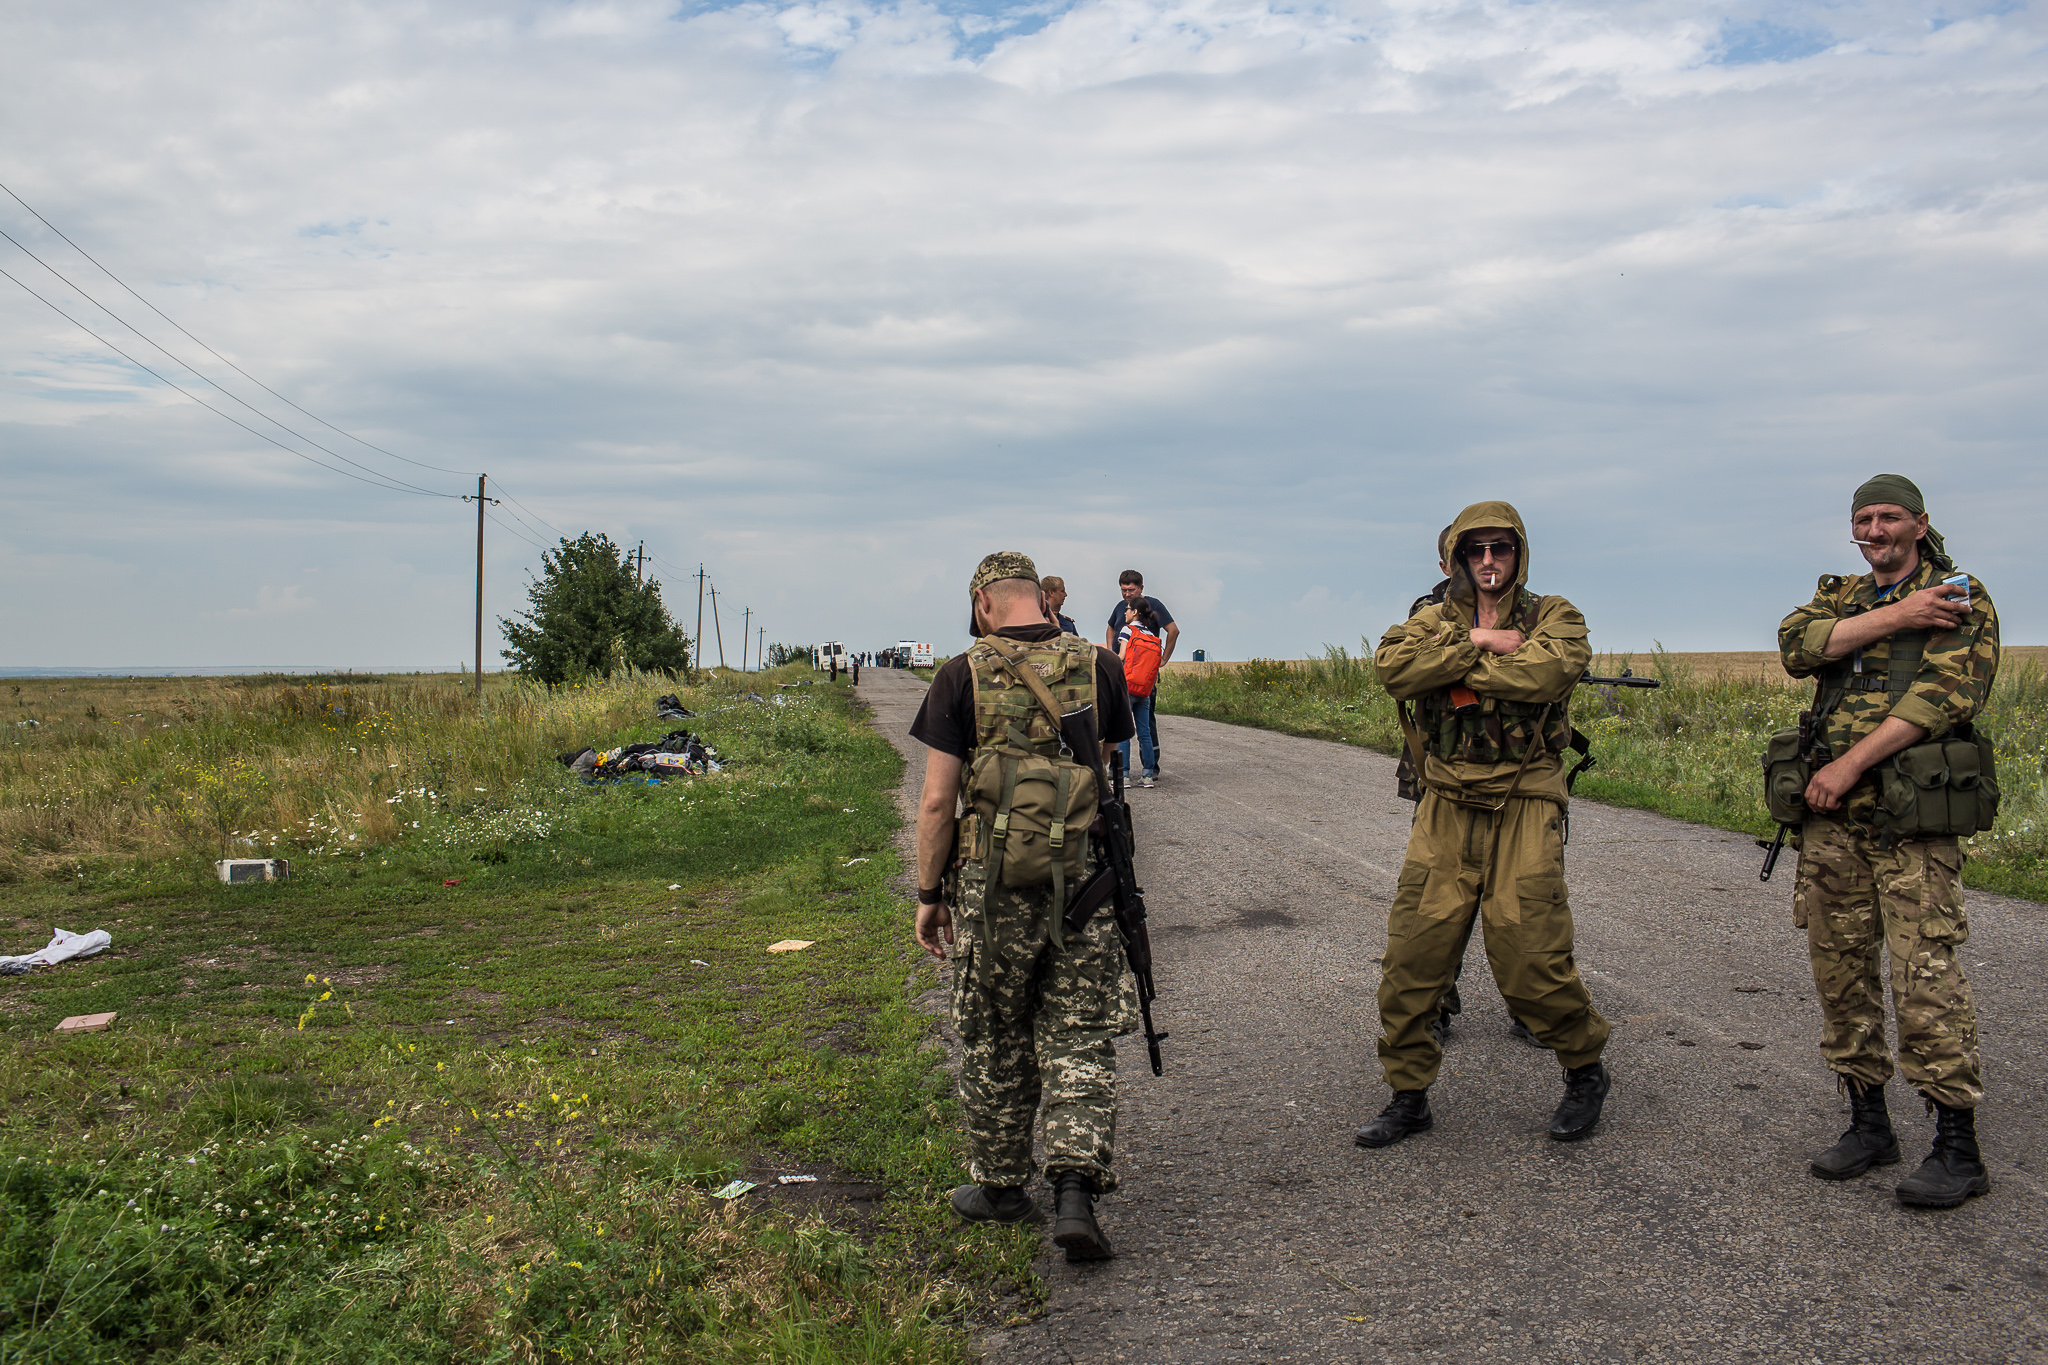  Pro-Russia rebels guard the site of the crash of Malaysia Airlines flight MH17 on July 19, 2014 in Grabovo, Ukraine. Malaysia Airlines flight MH17 was travelling from Amsterdam to Kuala Lumpur when it crashed killing all 298 on board including 80 ch